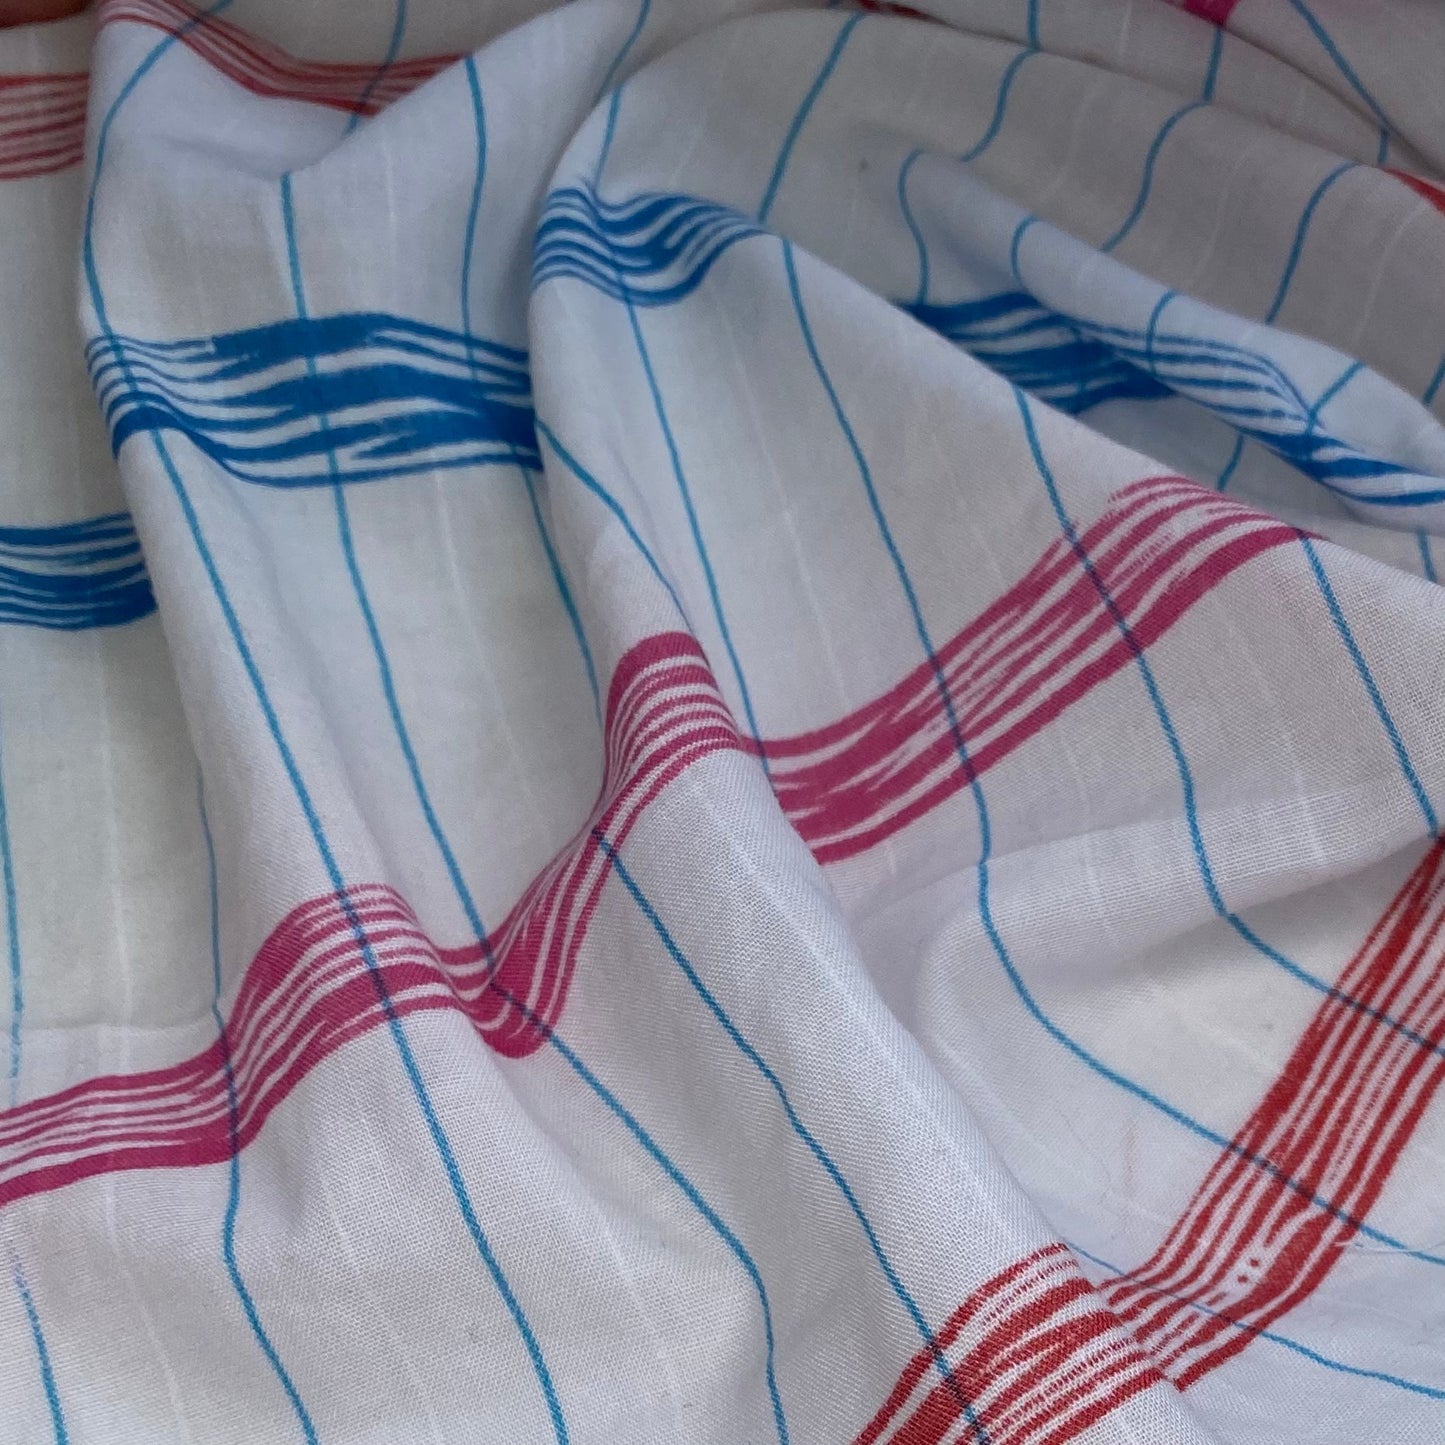 Striped Cotton/Polyester - 44” - White/Blue/Pink/Red